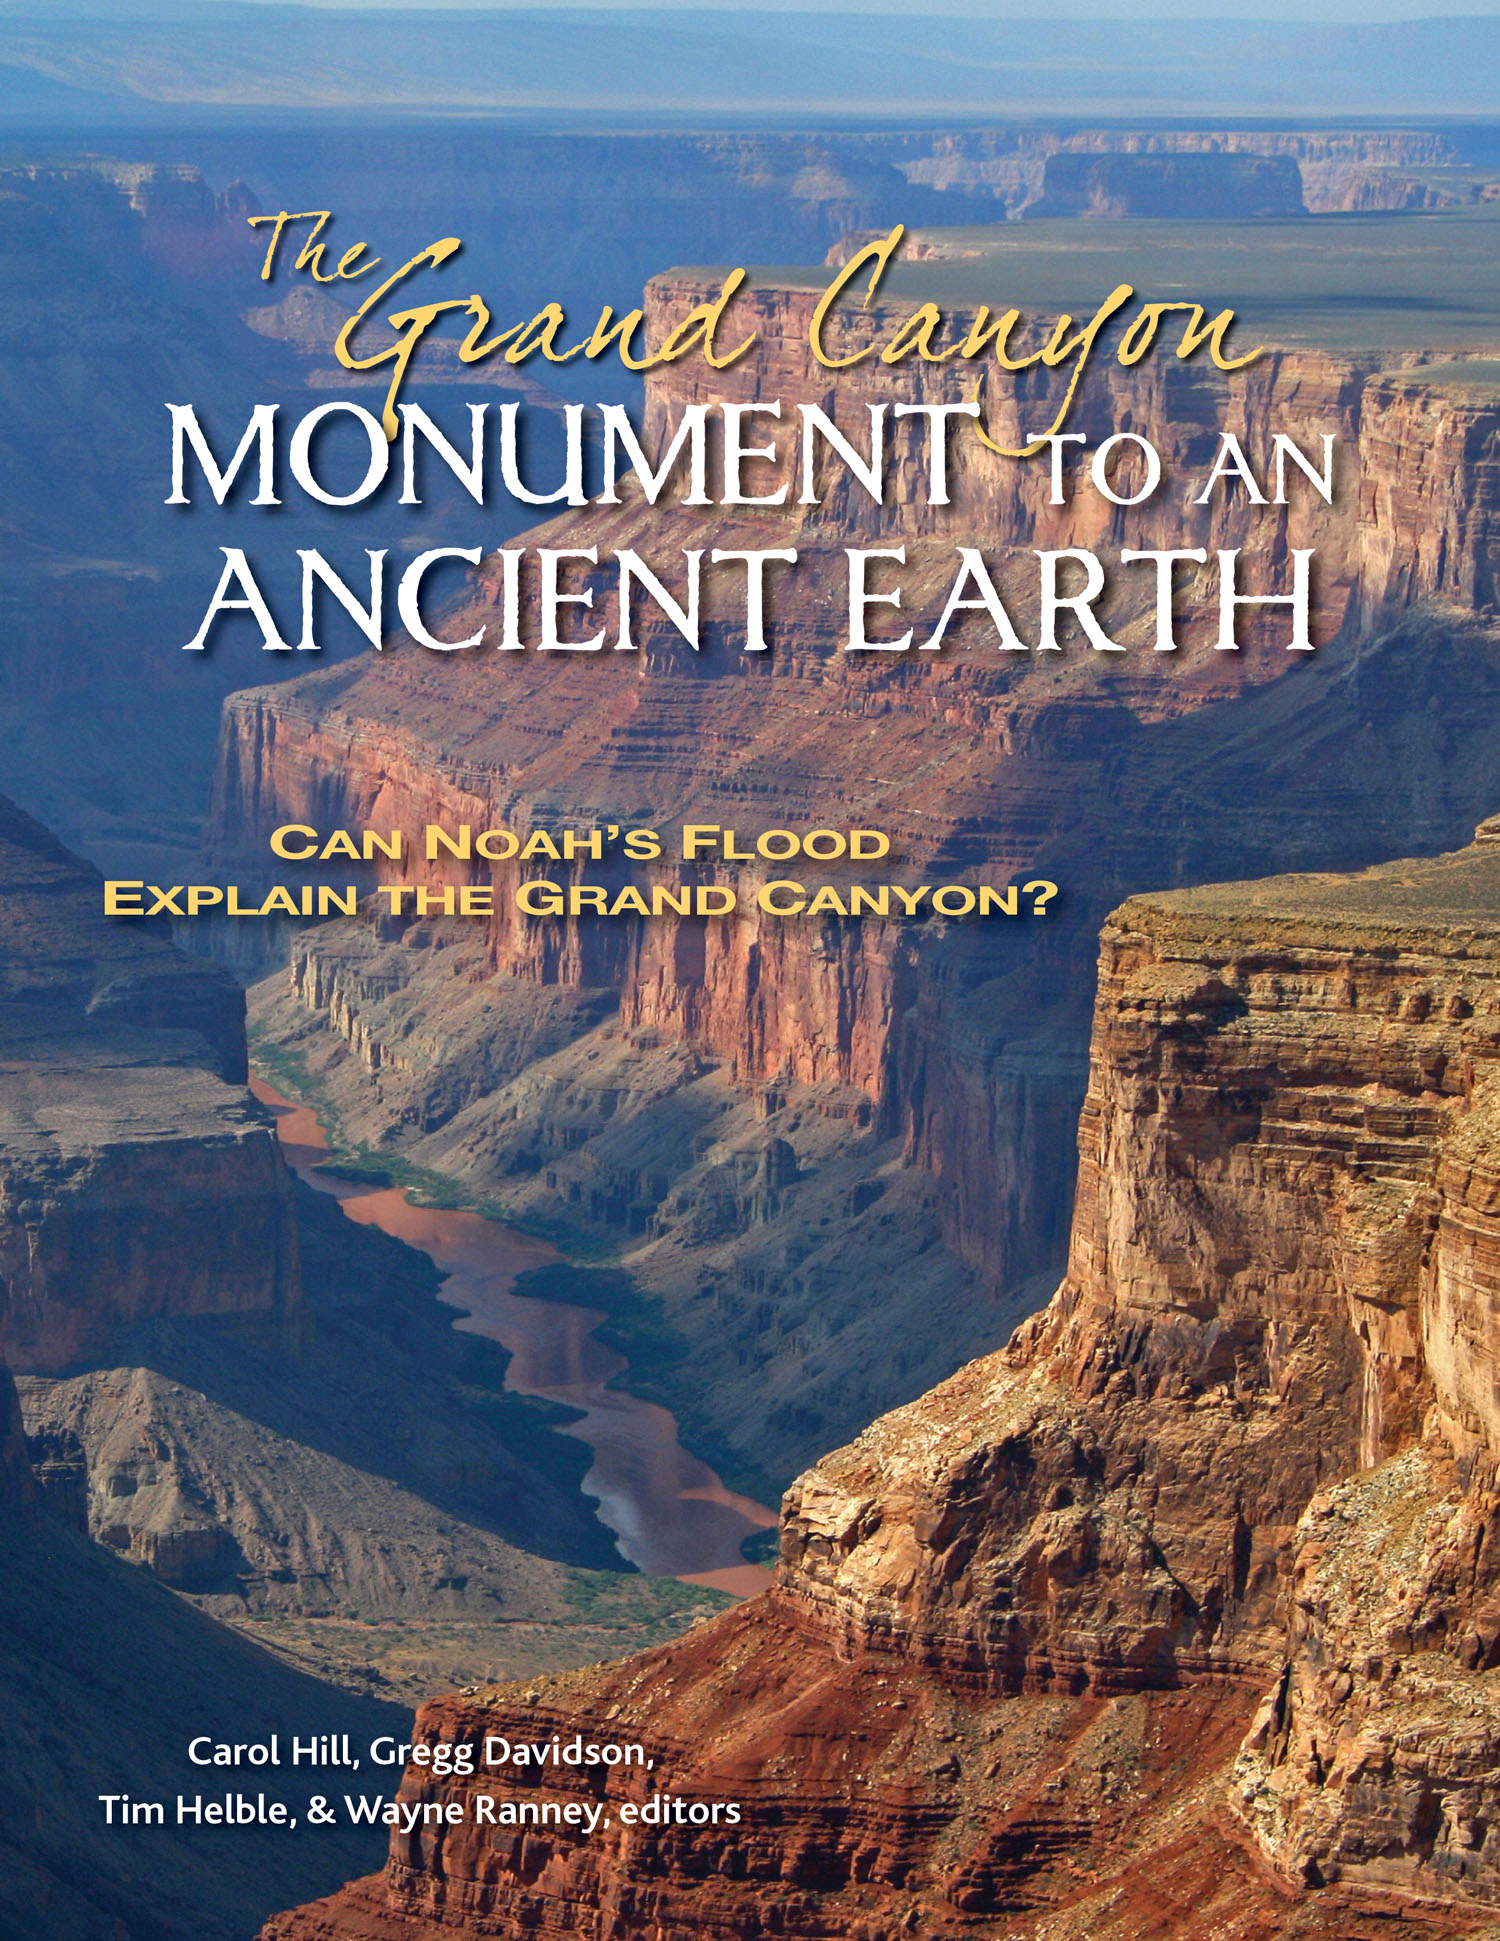 The Grand Canyon, Monument to an Ancient Earth